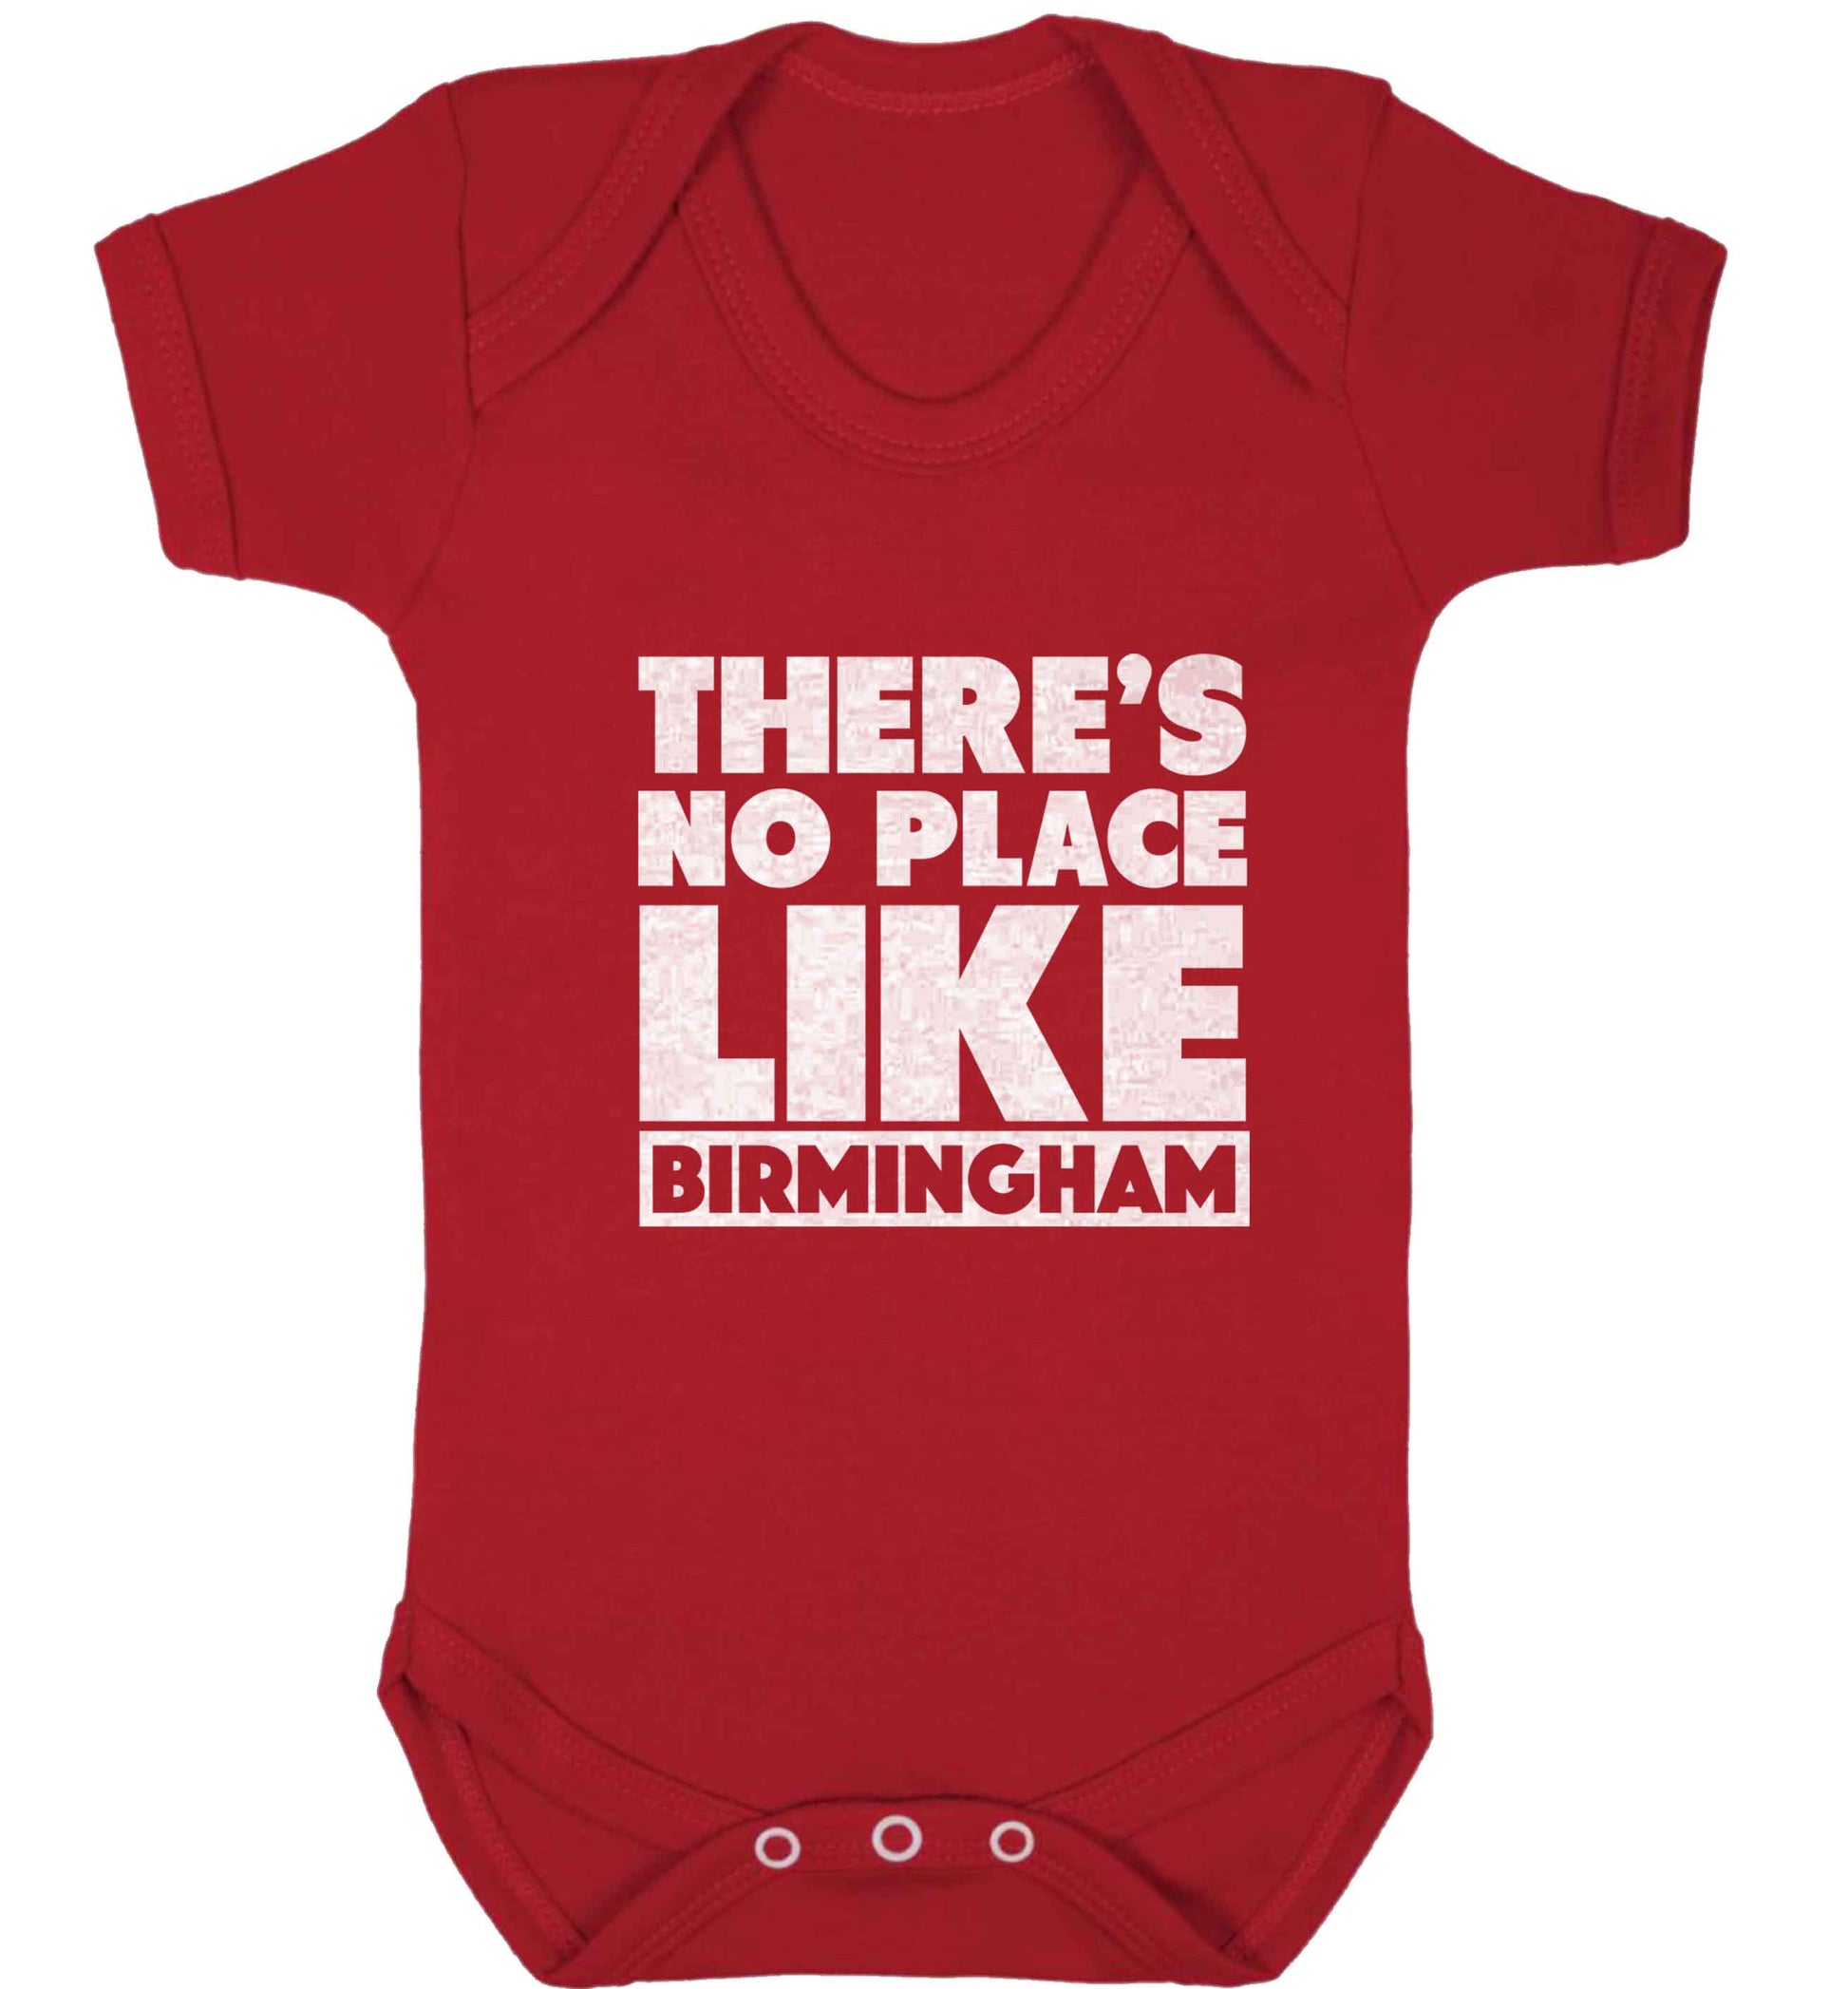 There's no place like Birmingham baby vest red 18-24 months